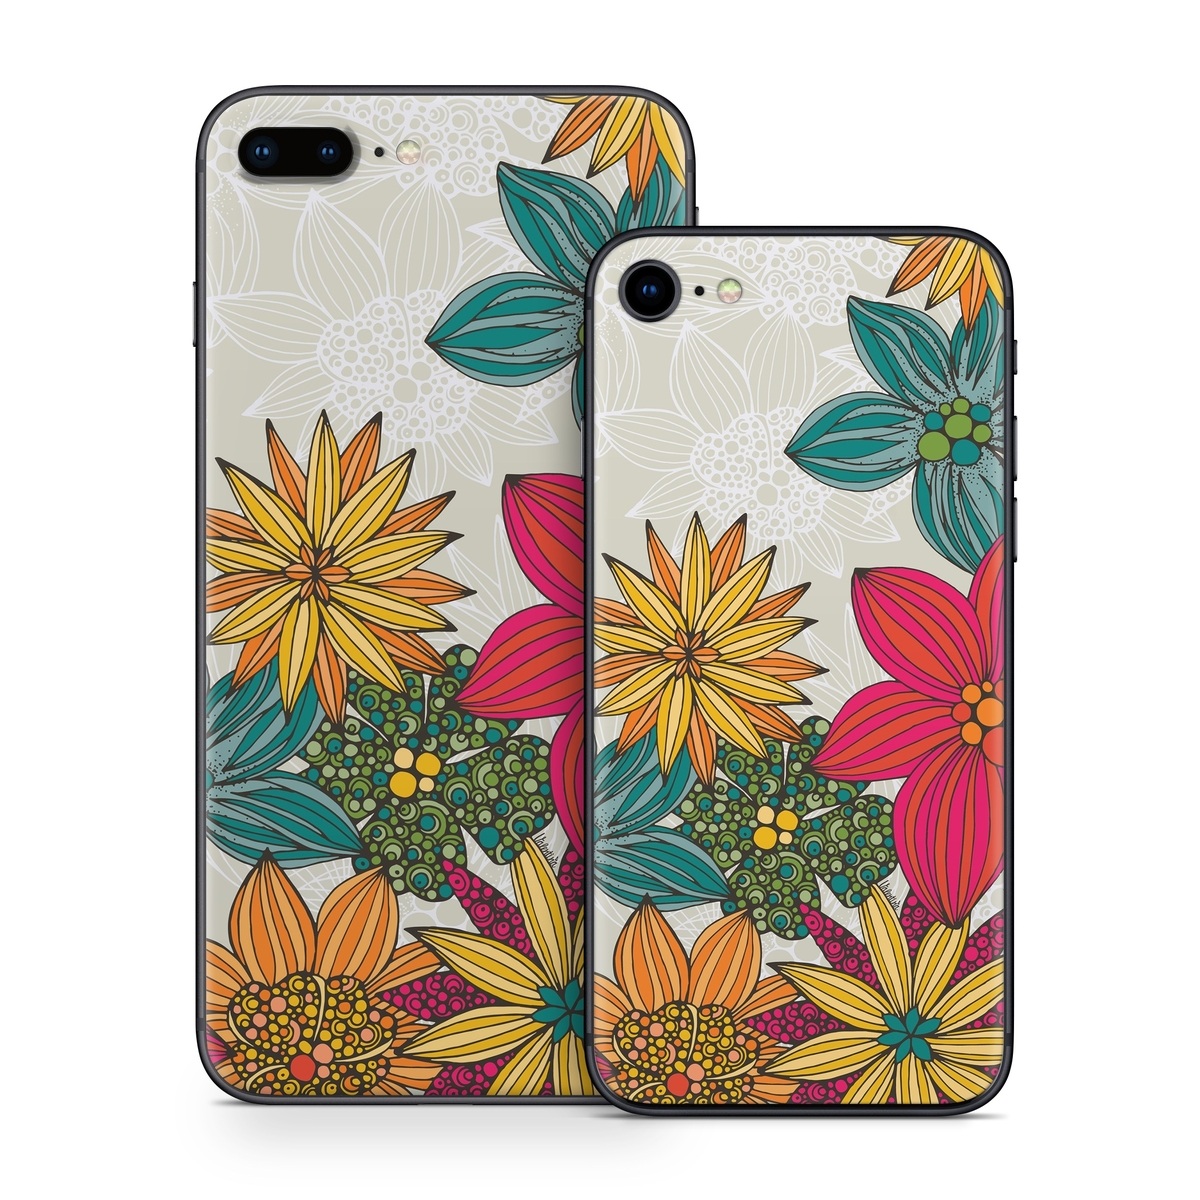  Skin design of Floral design, Pattern, Flower, Wildflower, Plant, Botany, Leaf, Design, Textile, Visual arts, with blue, yellow, red, green, orange, gray colors